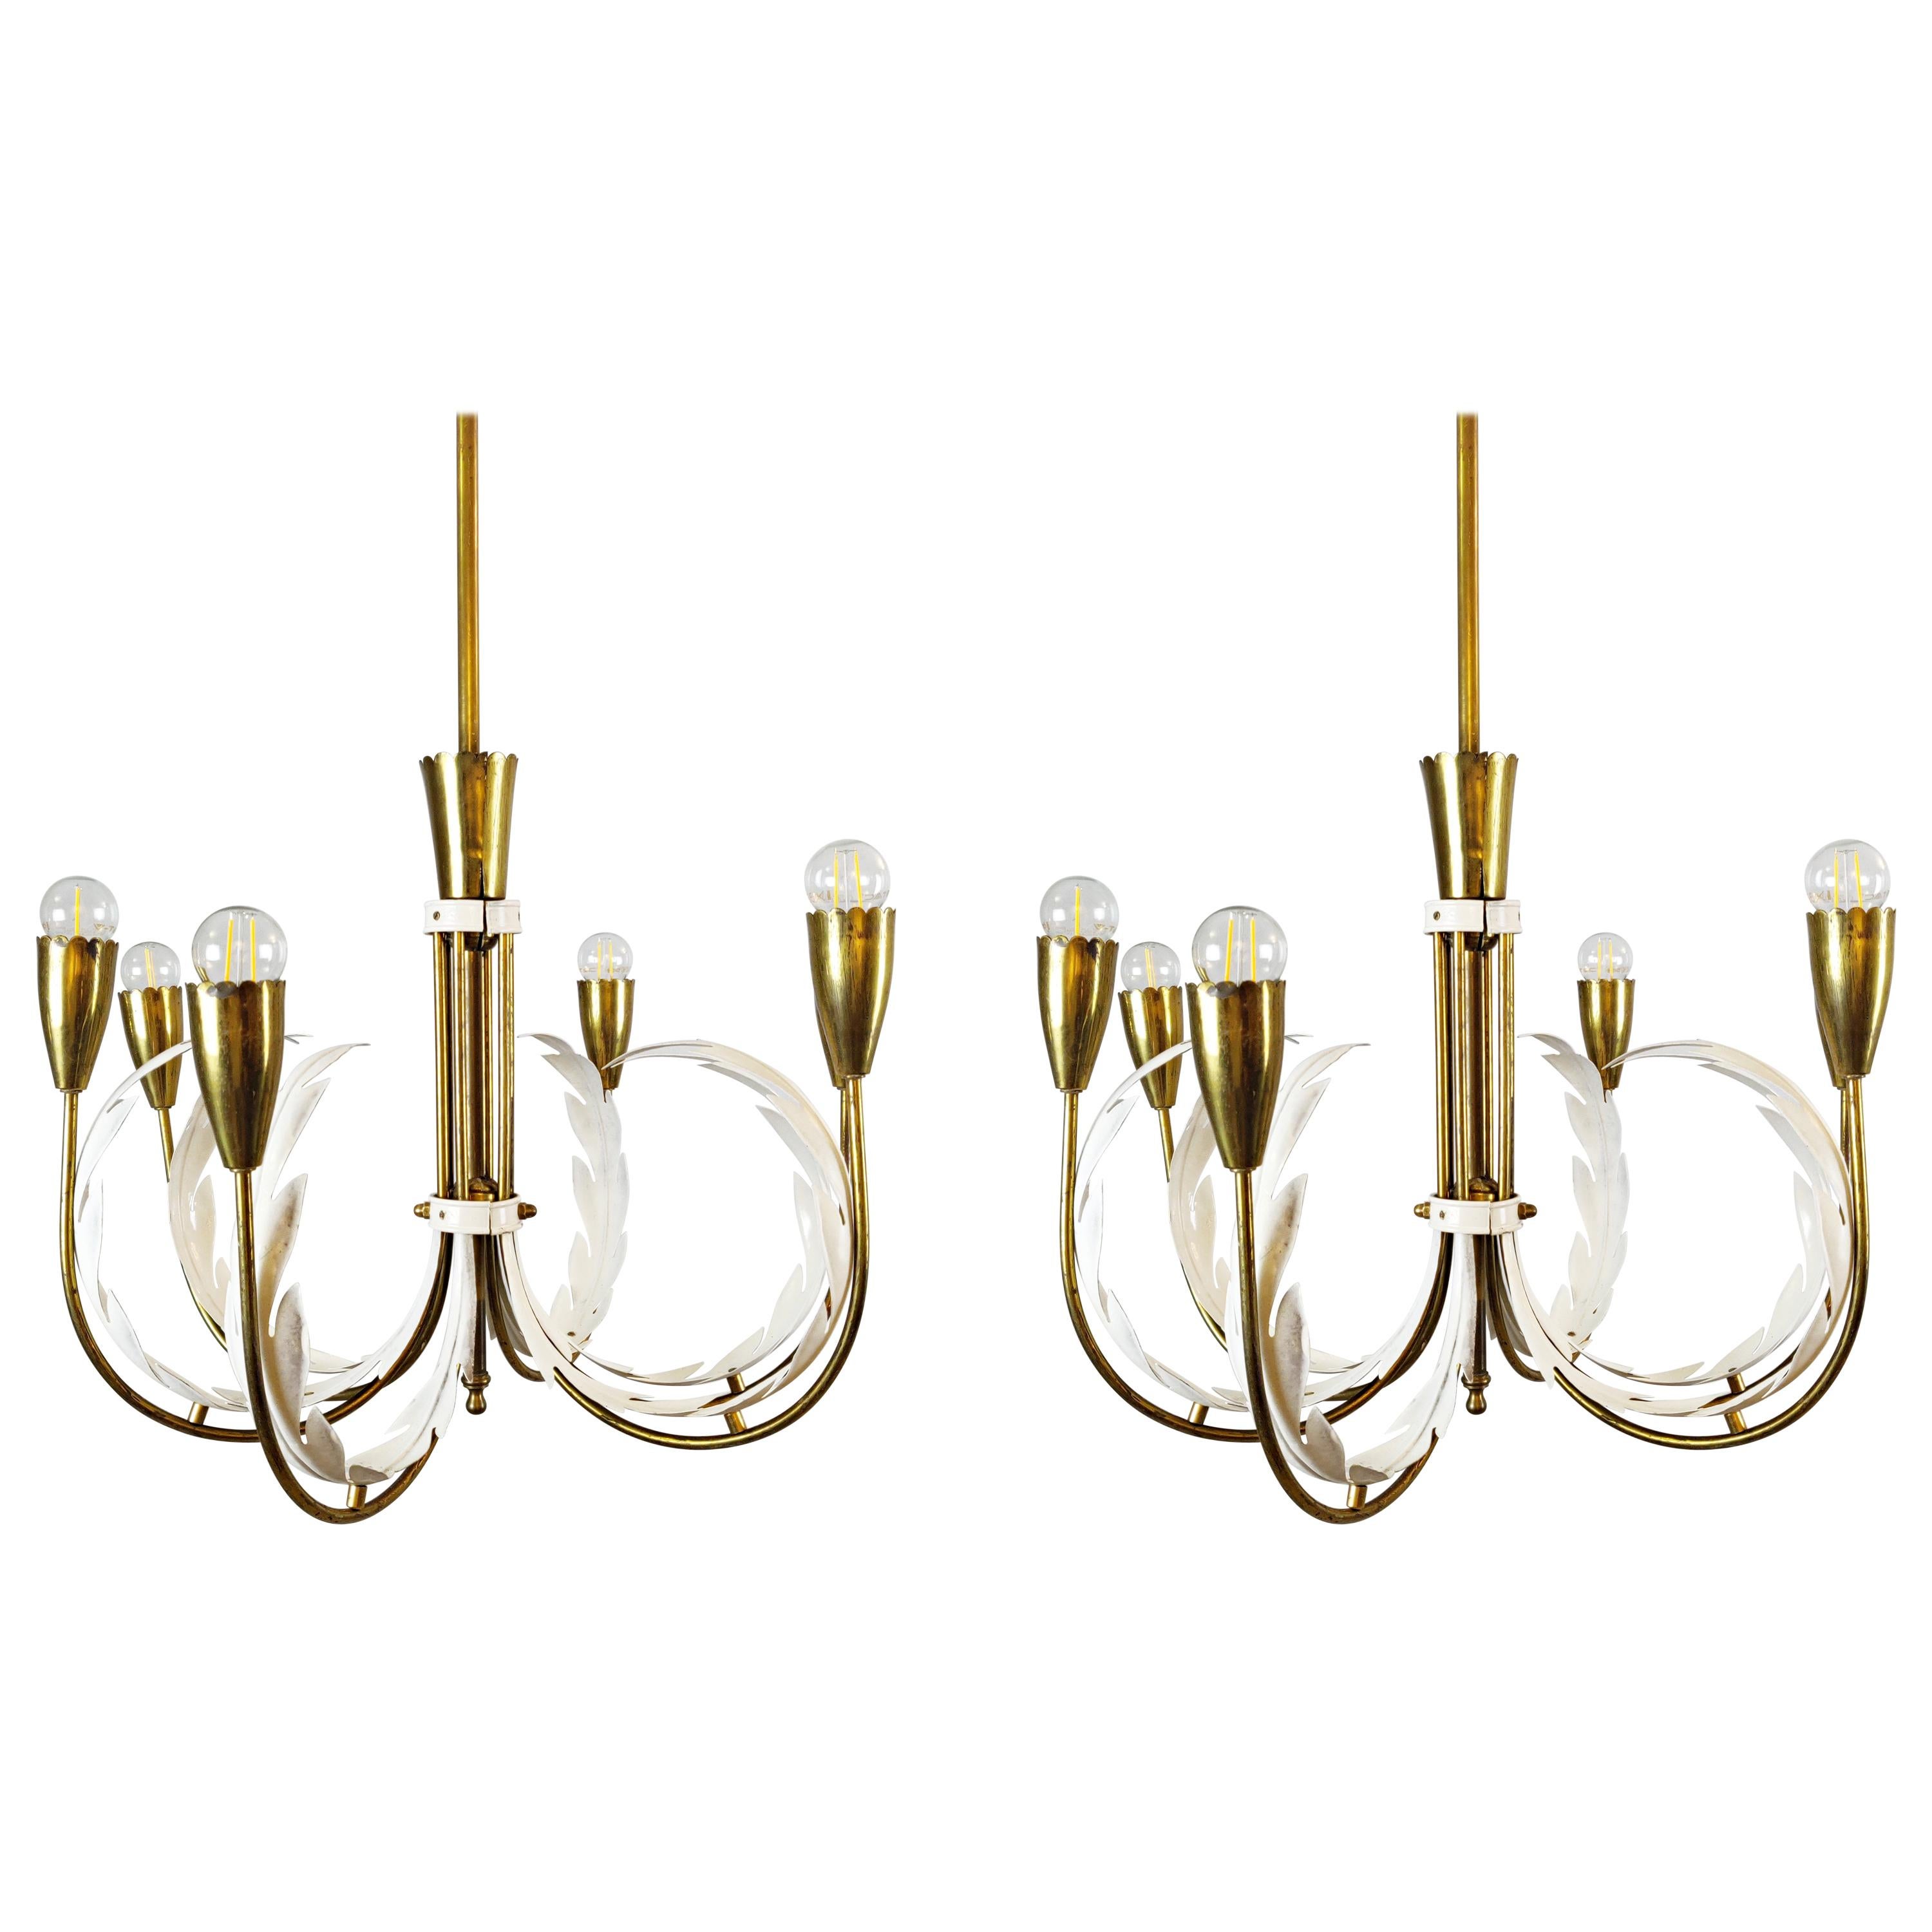 Pair of Italian Brass Chandeliers For Sale